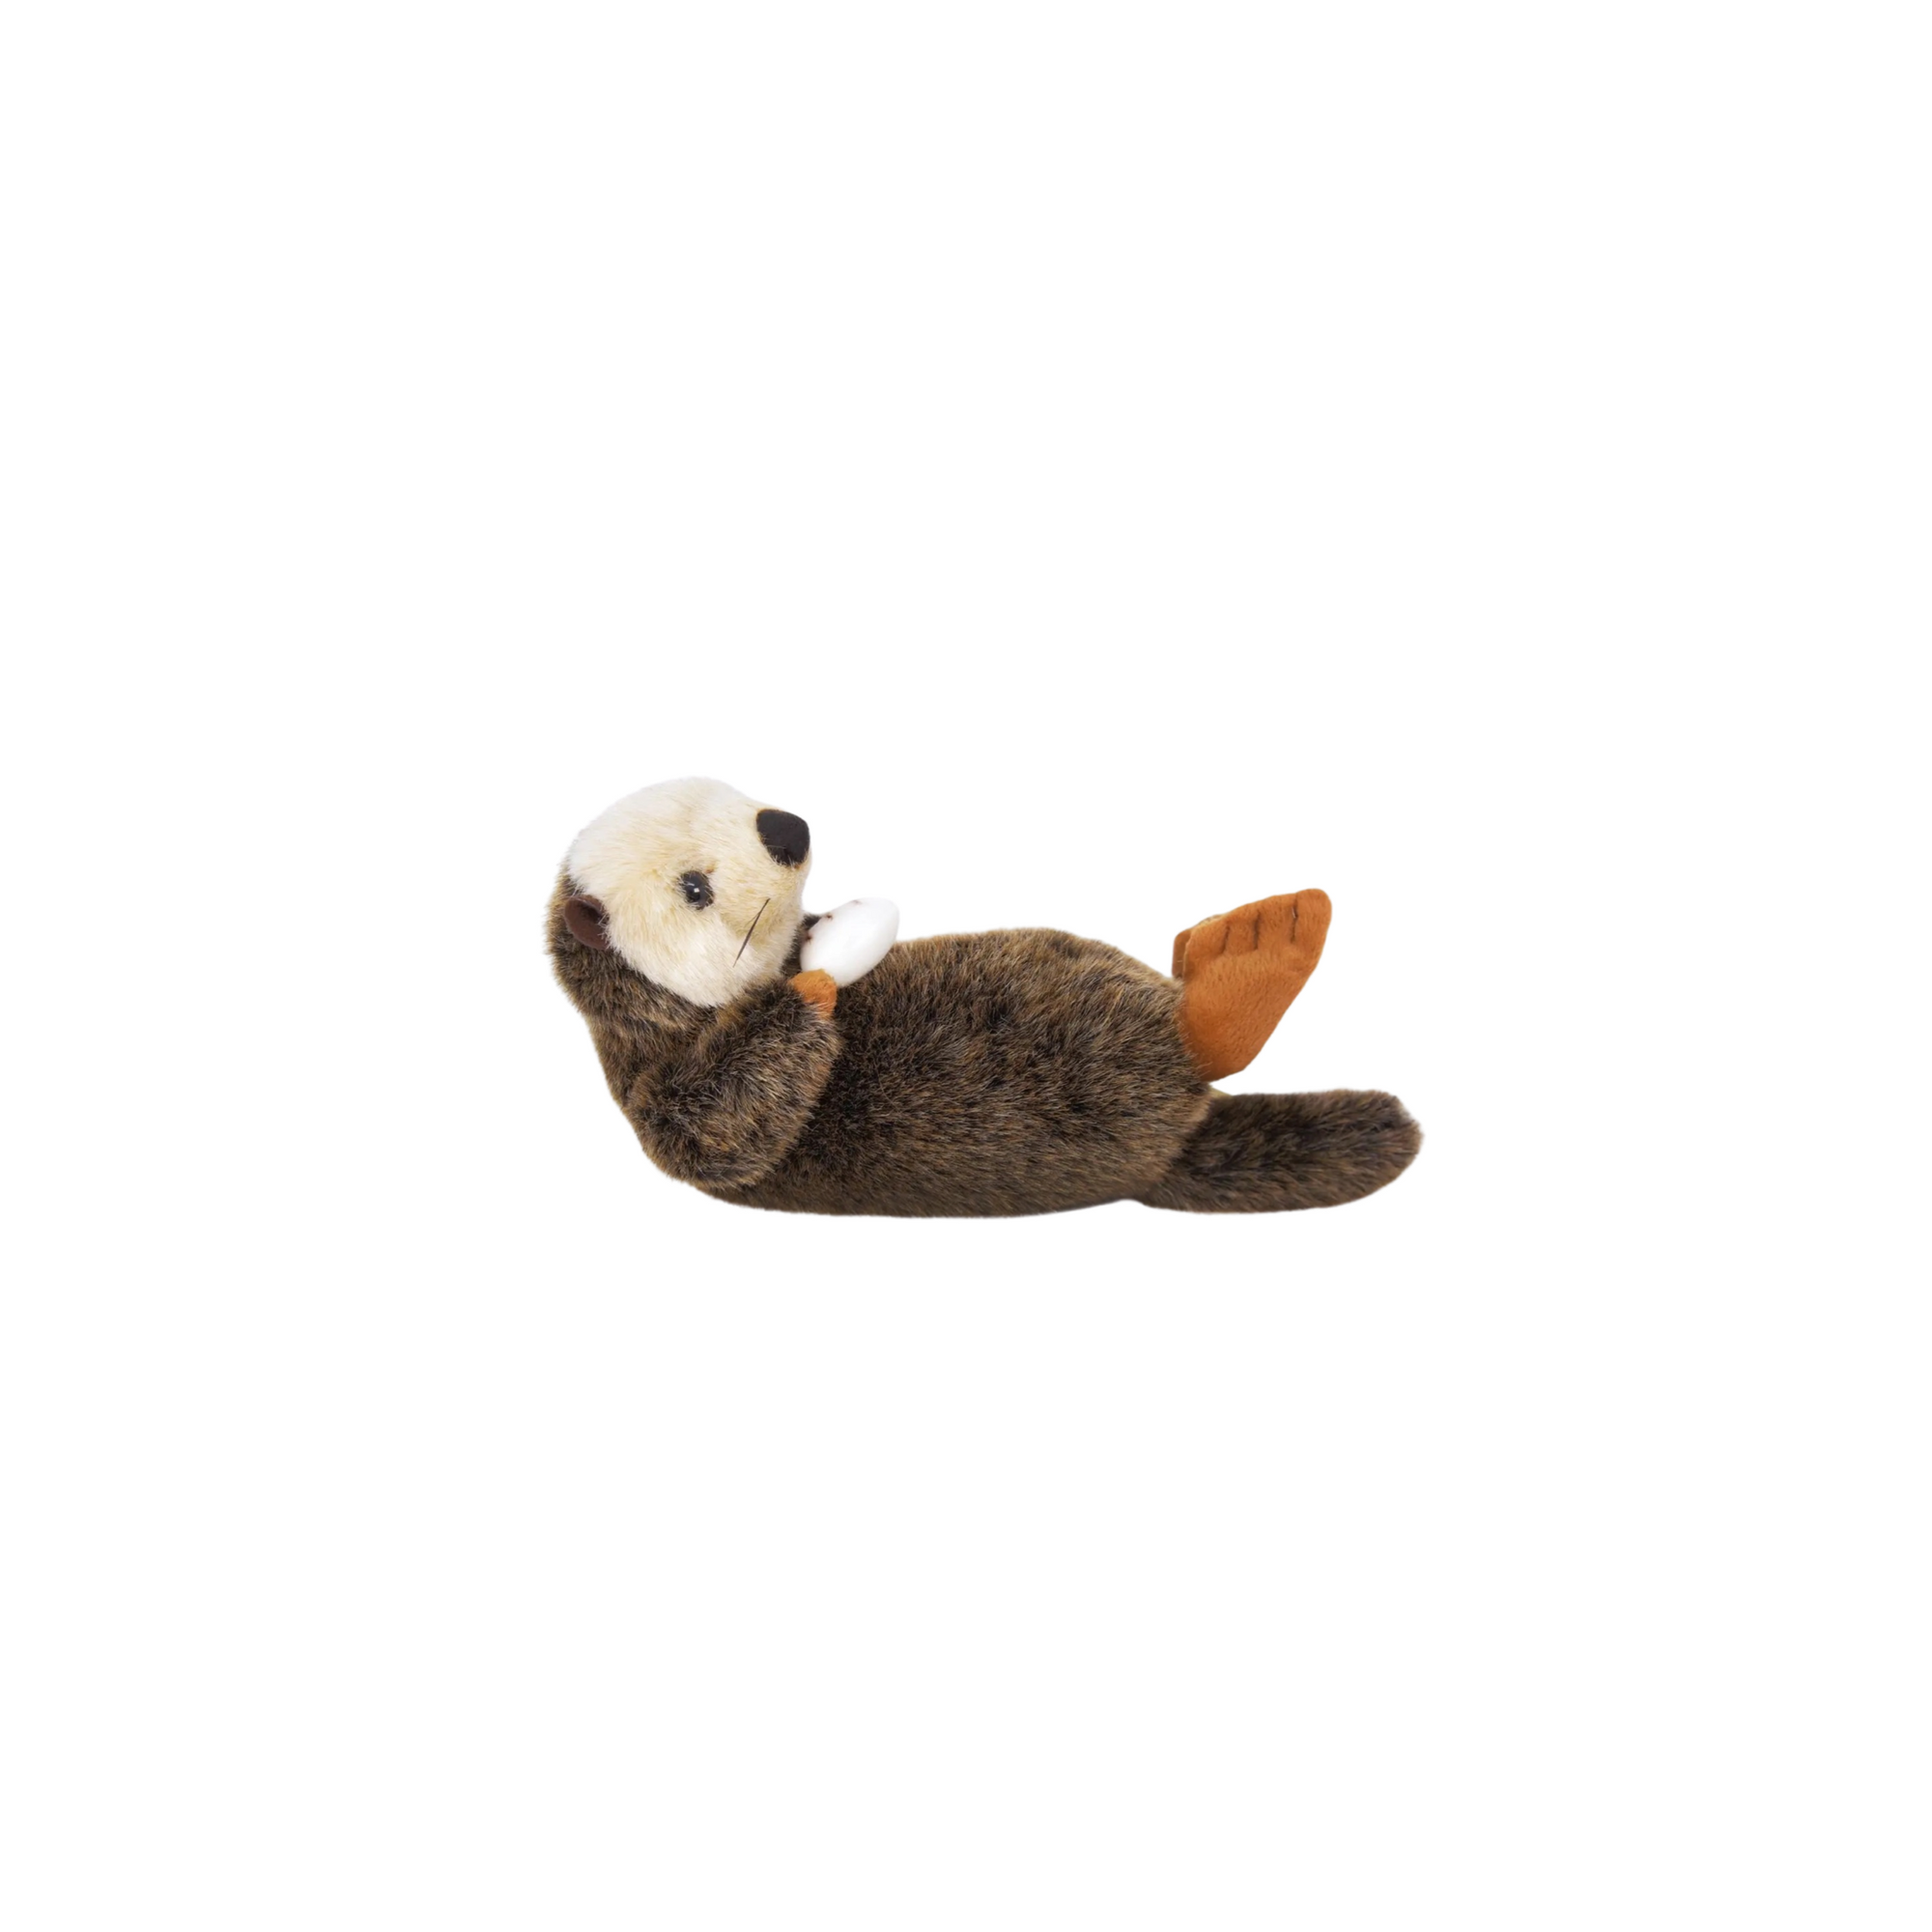 Owen The Sea Otter with white shell